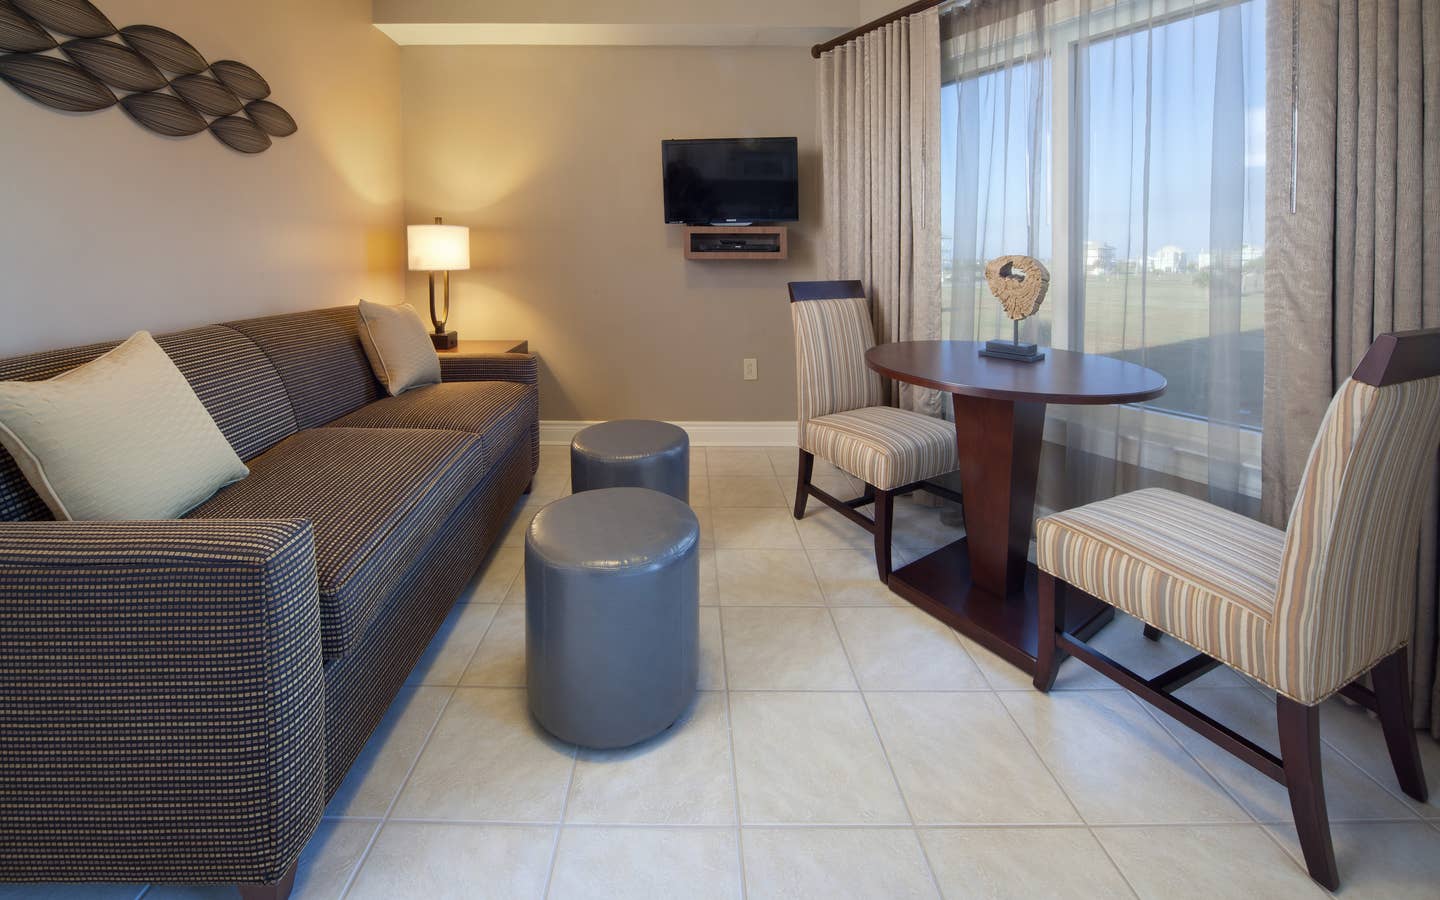 Living room with couch, flat screen TV, and large window with seating area in a villa at Galveston Beach Resort